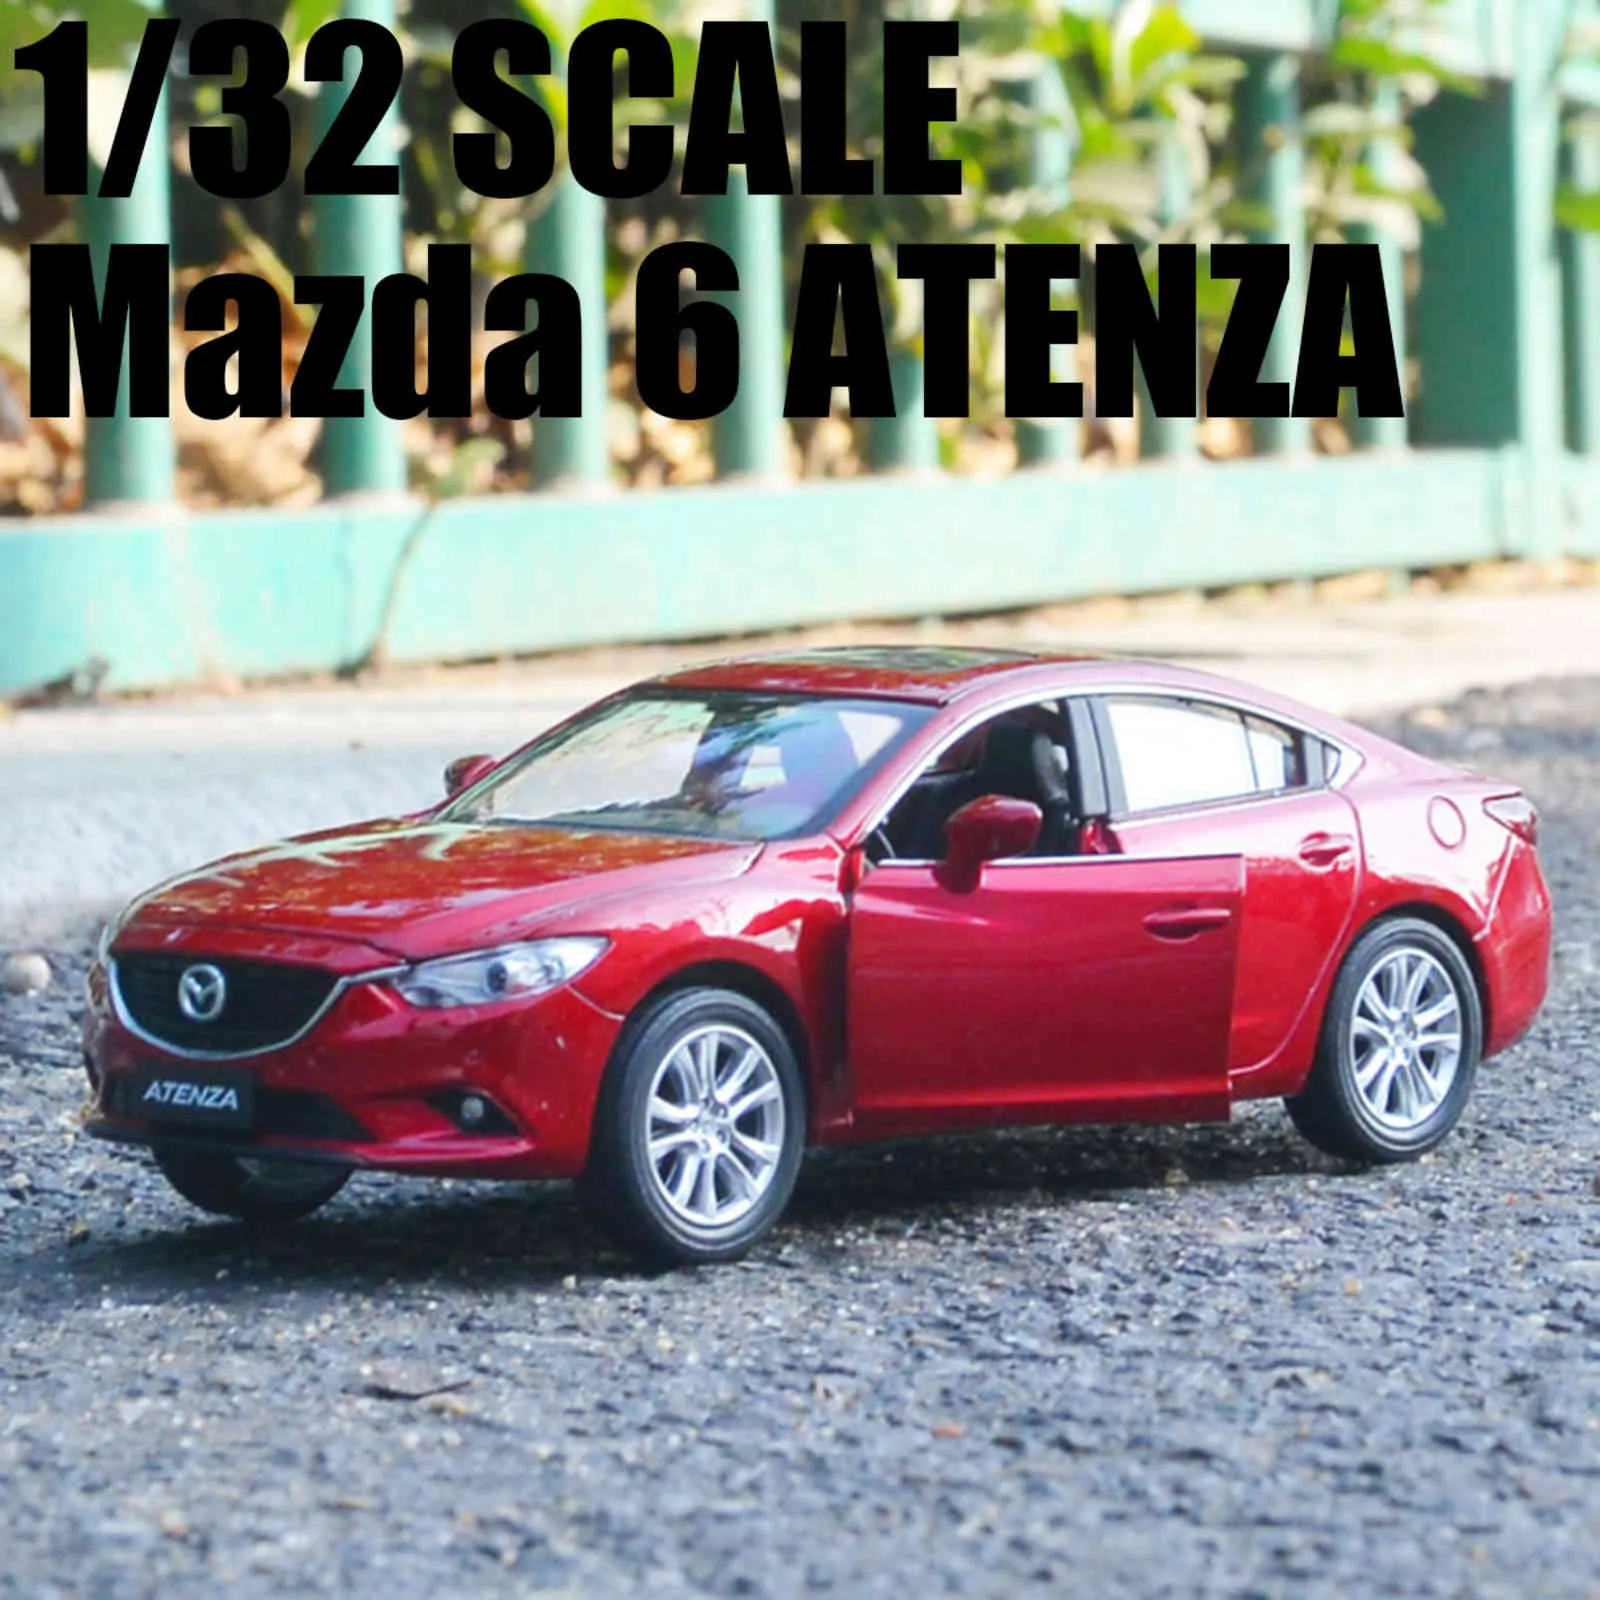 Mazda 6 Atenza 132 Alloy Car Die Casting Toys With Sound Collection Leverans Helt ny 202147984939553648